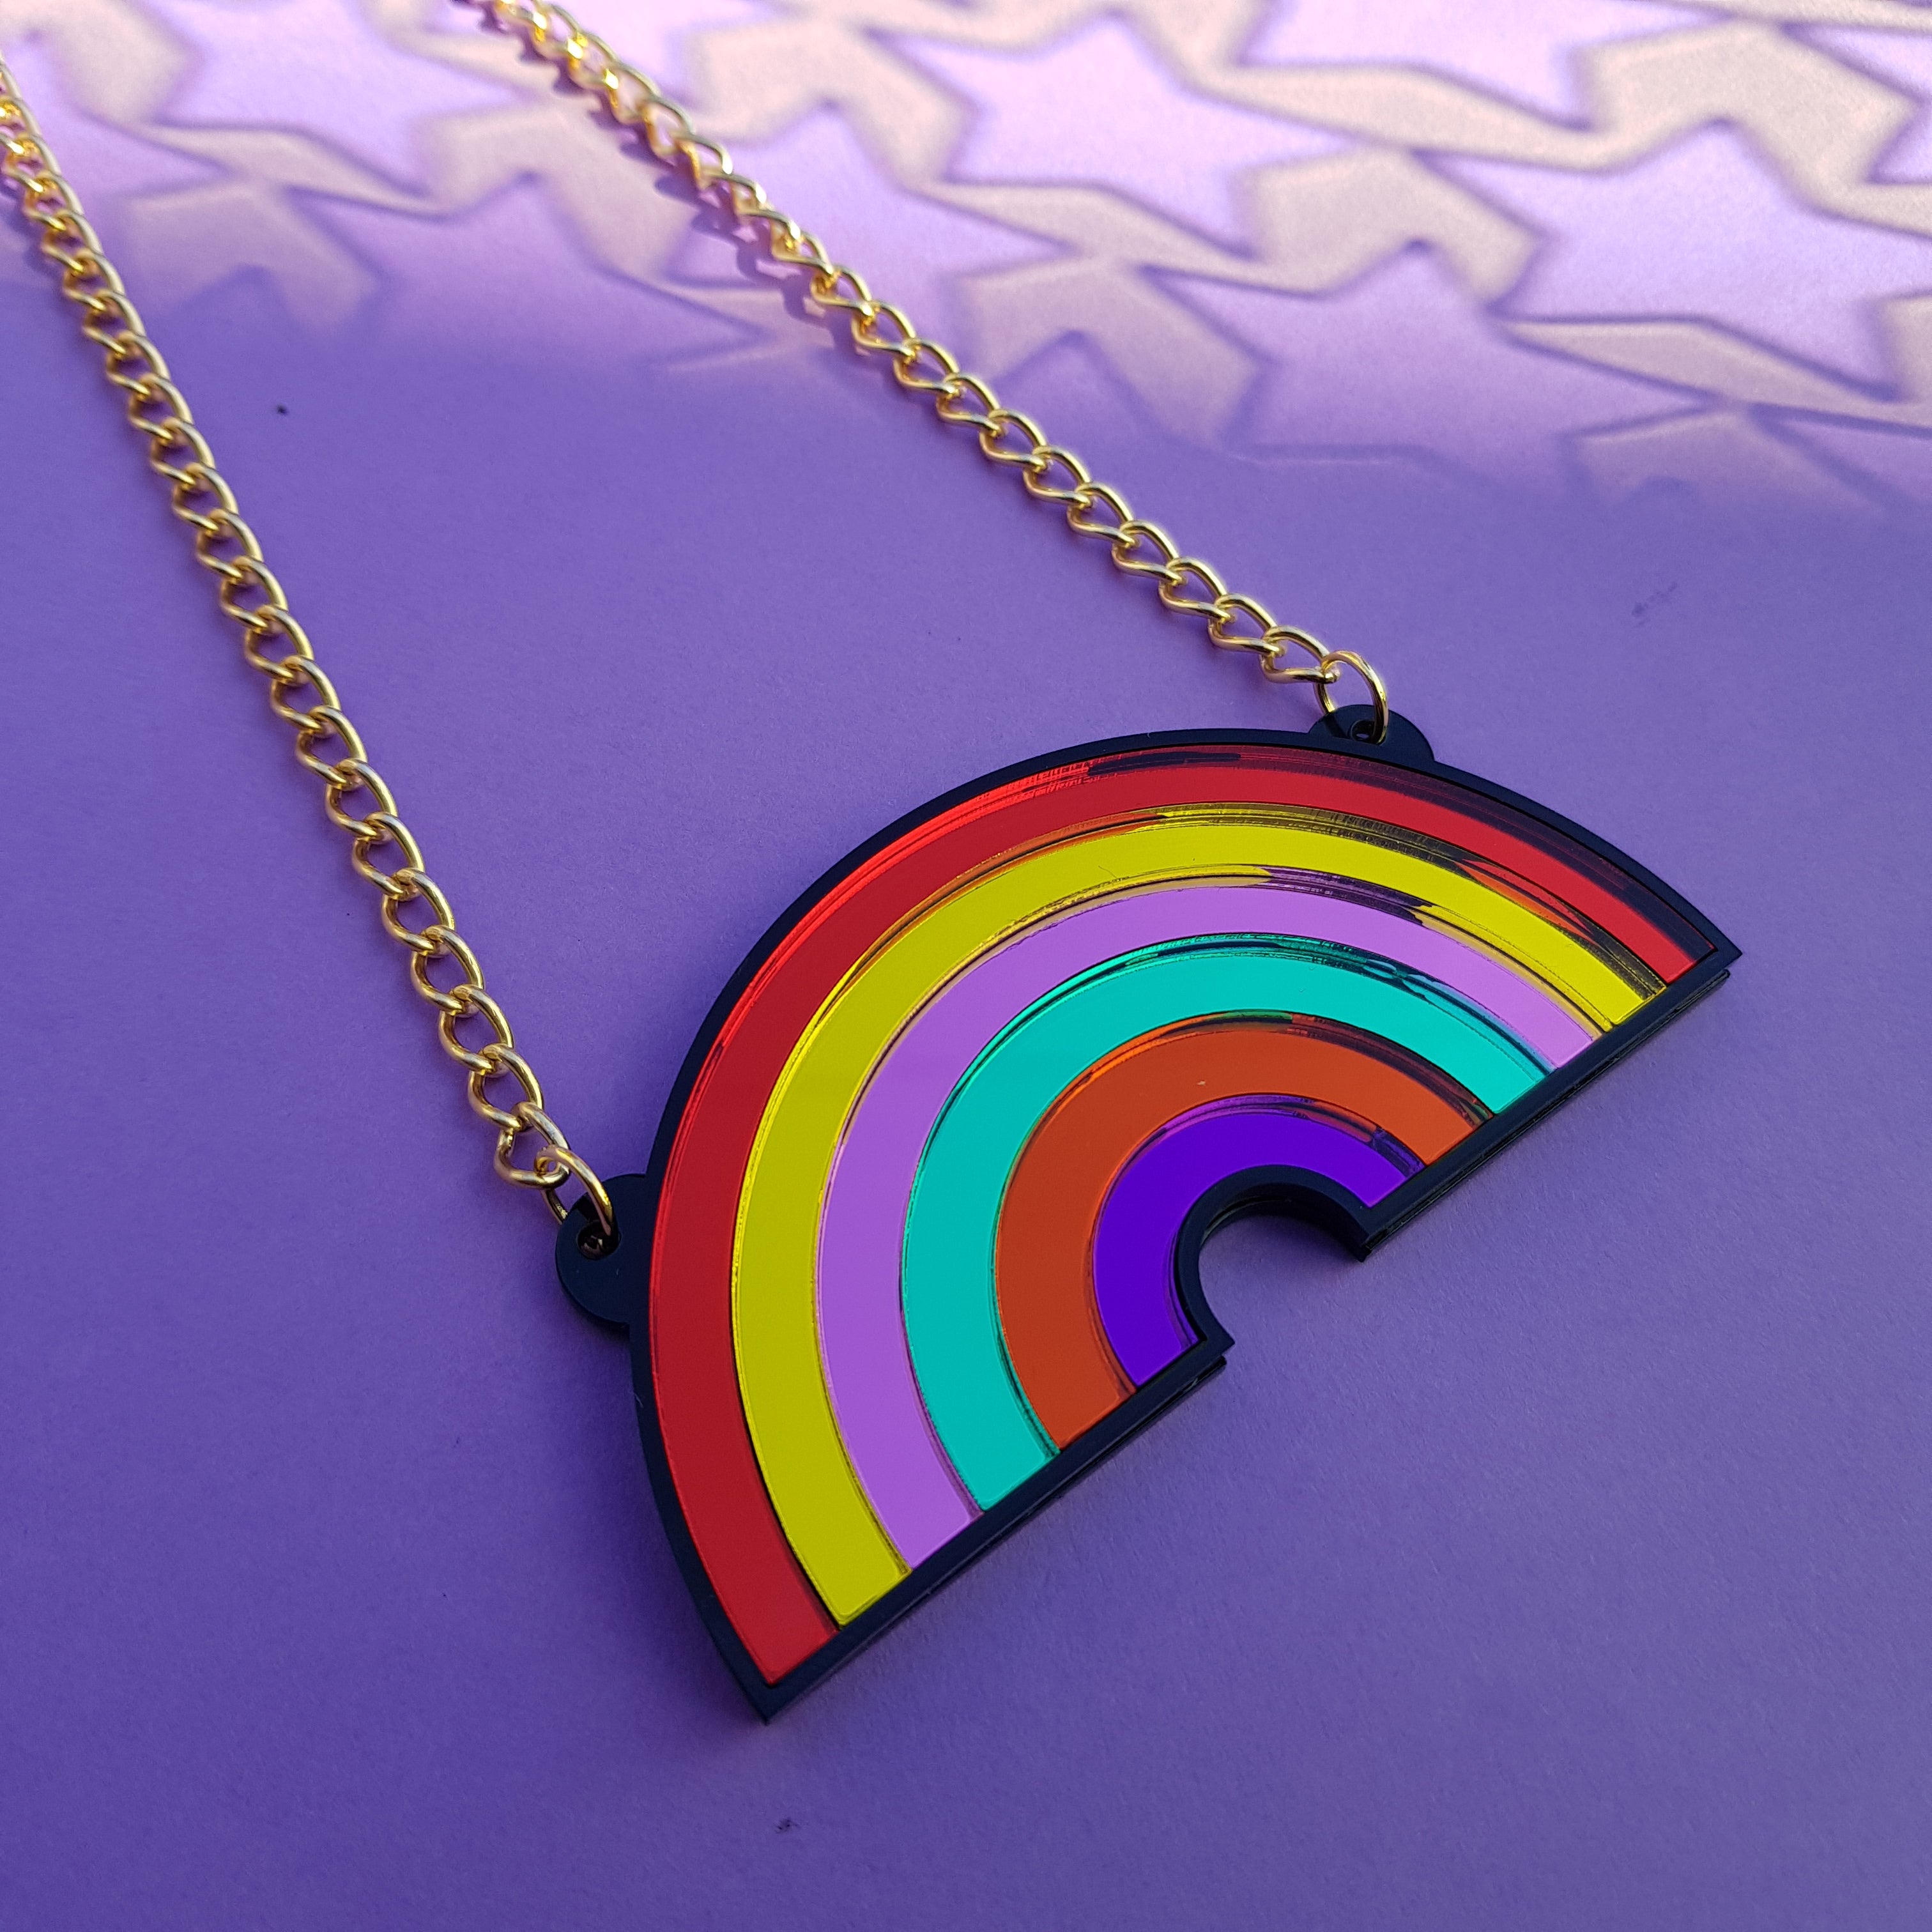 Rainbow necklace larger